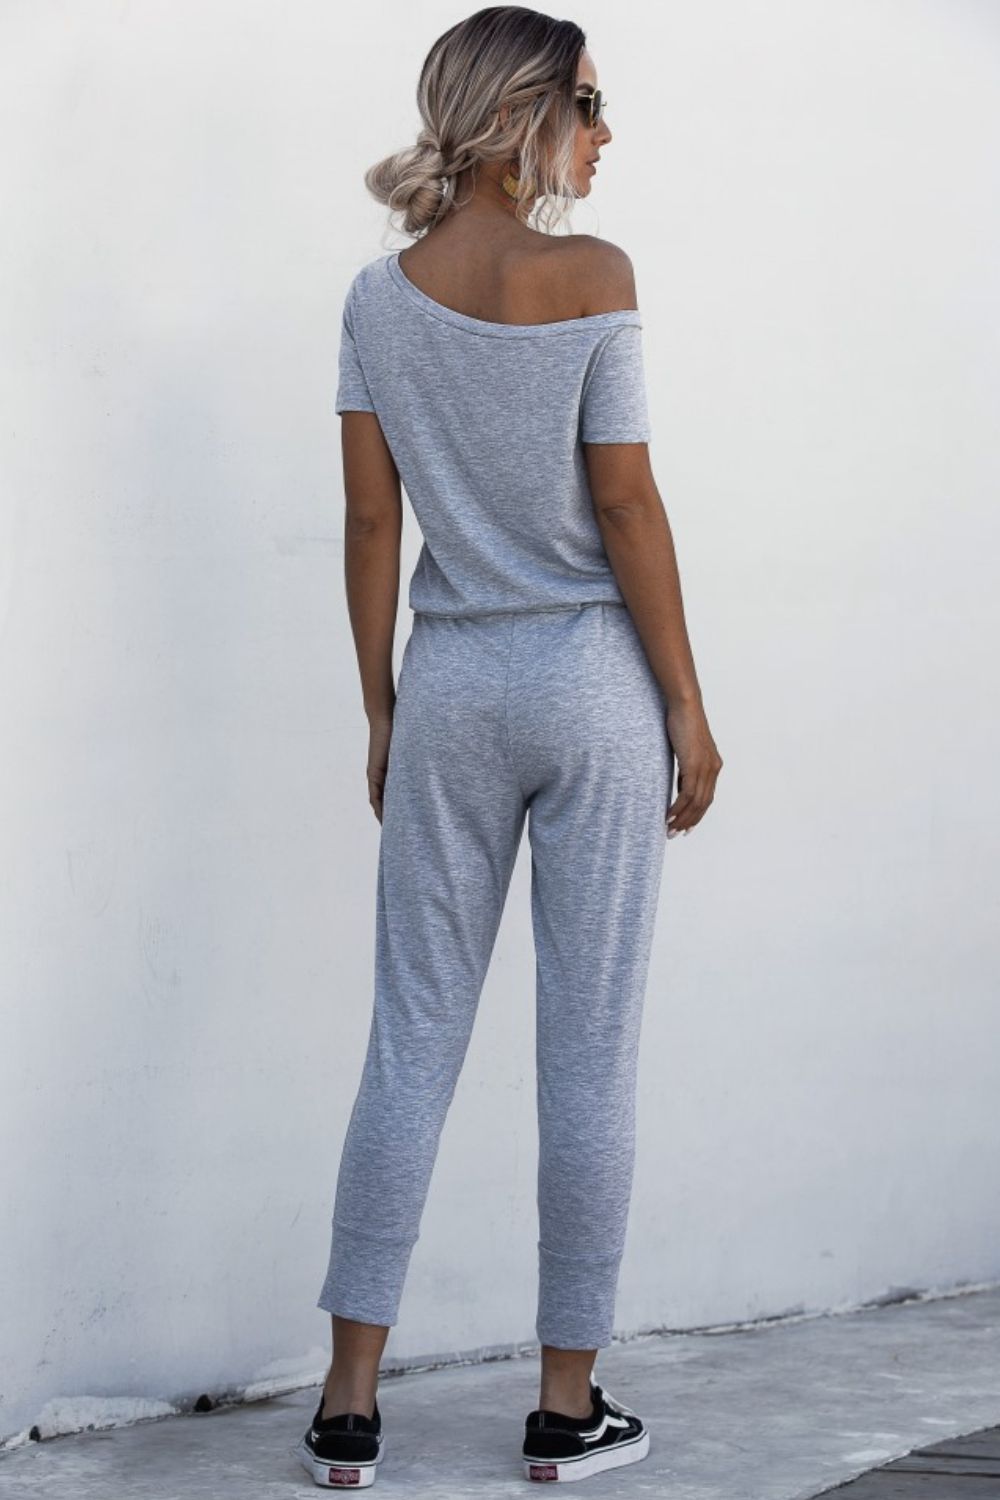 Asymmetrical Neck Tied Jumpsuit with Pockets - Online Only